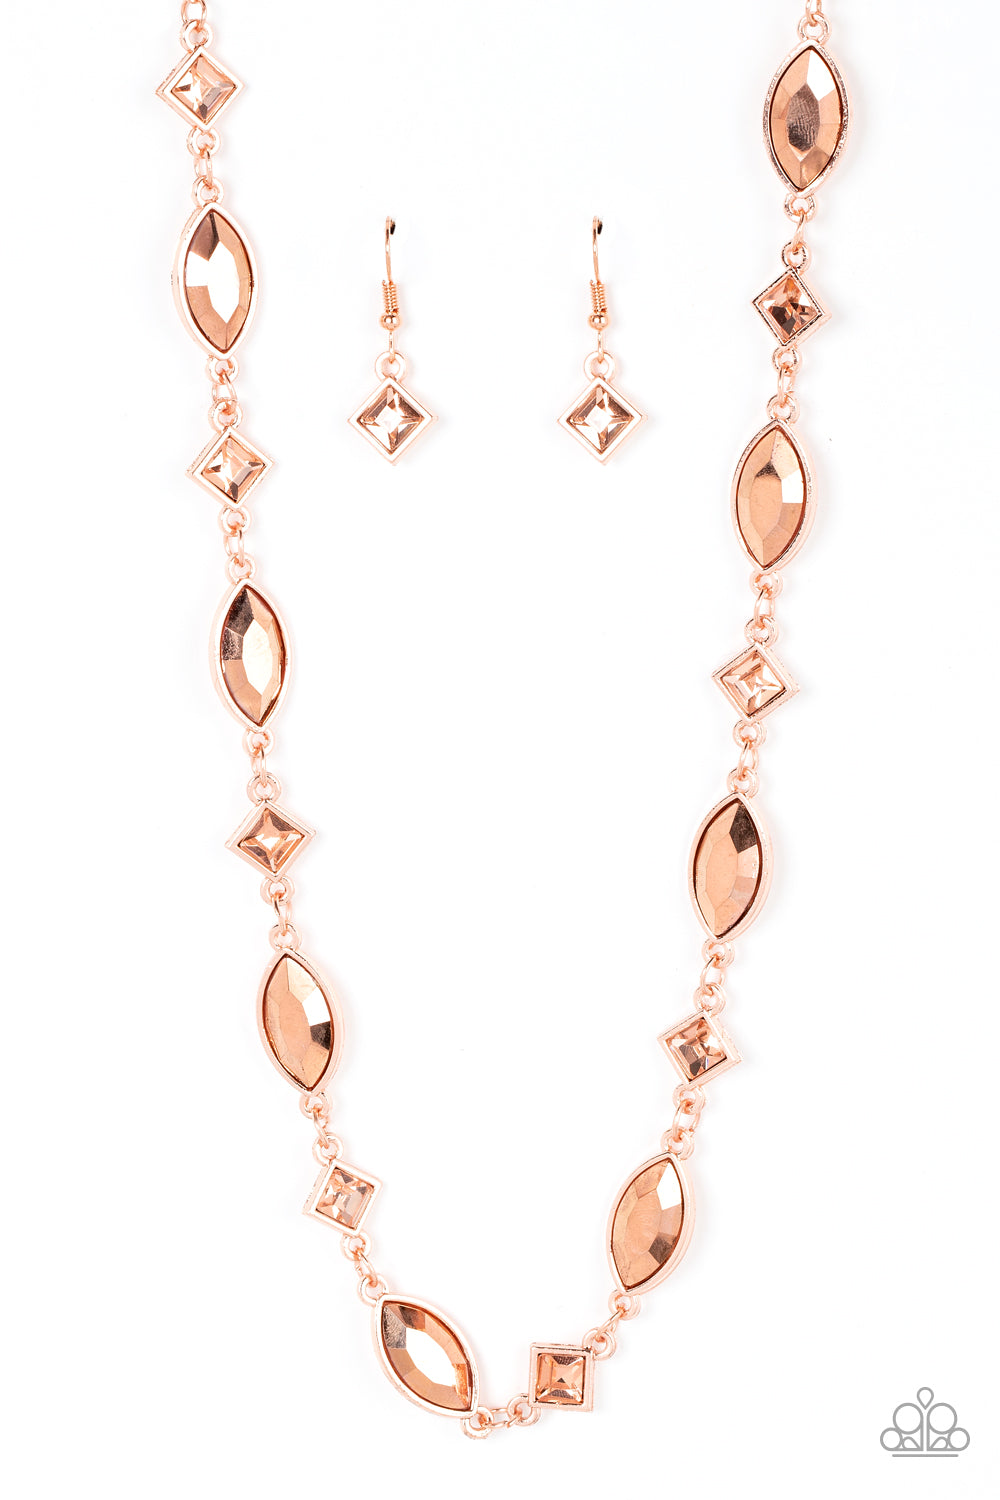 Prismatic Reinforcements Paparazzi Accessories Necklace with Earrings Copper